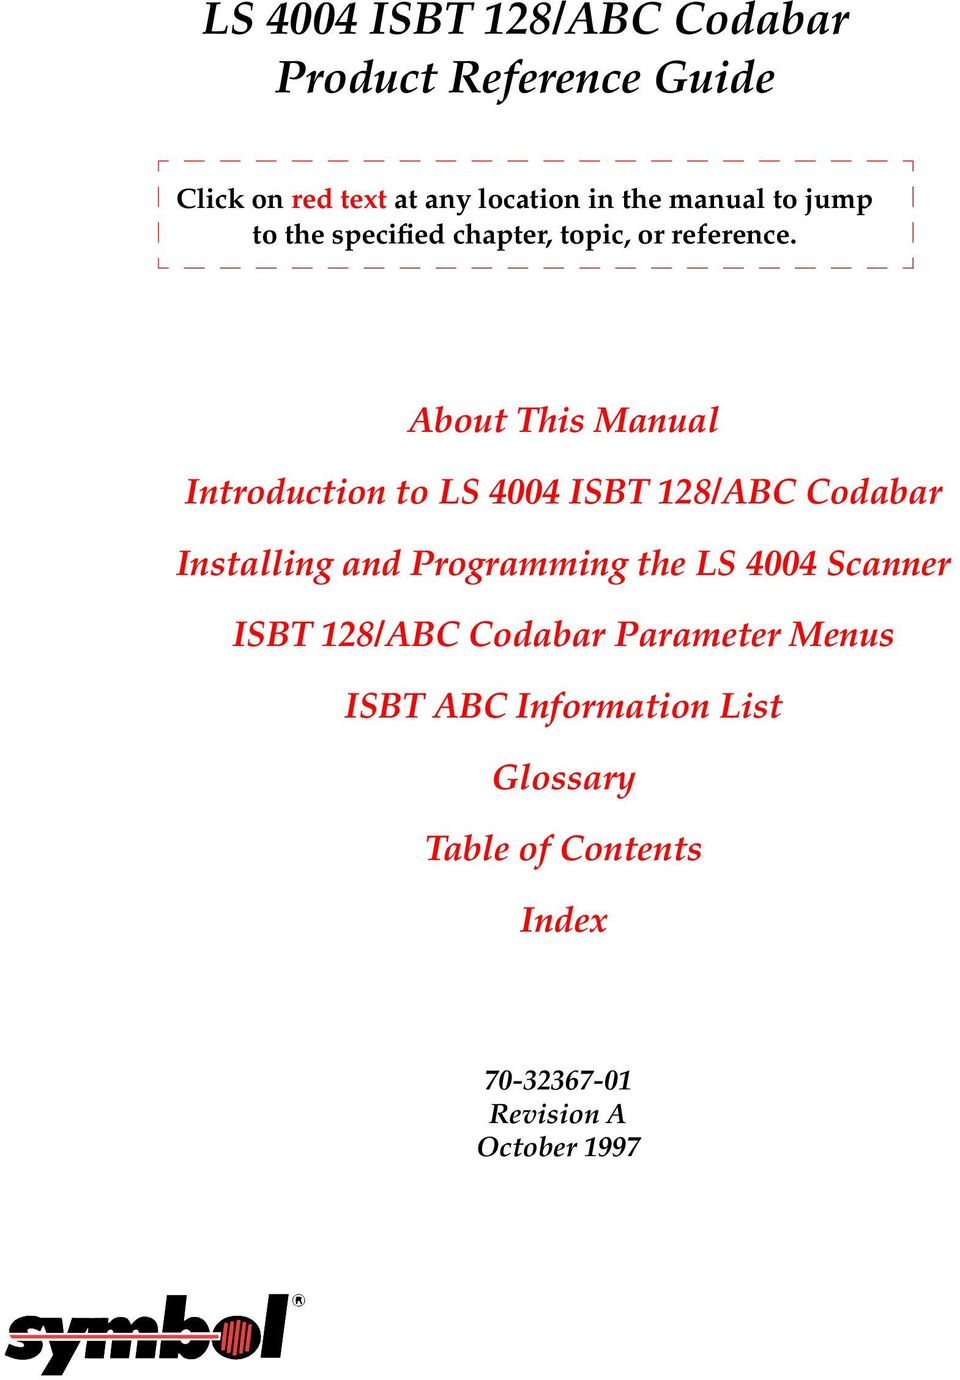 About This Manual Introduction to LS 4004 ISBT 128/ABC Codabar Installing and Programming the LS